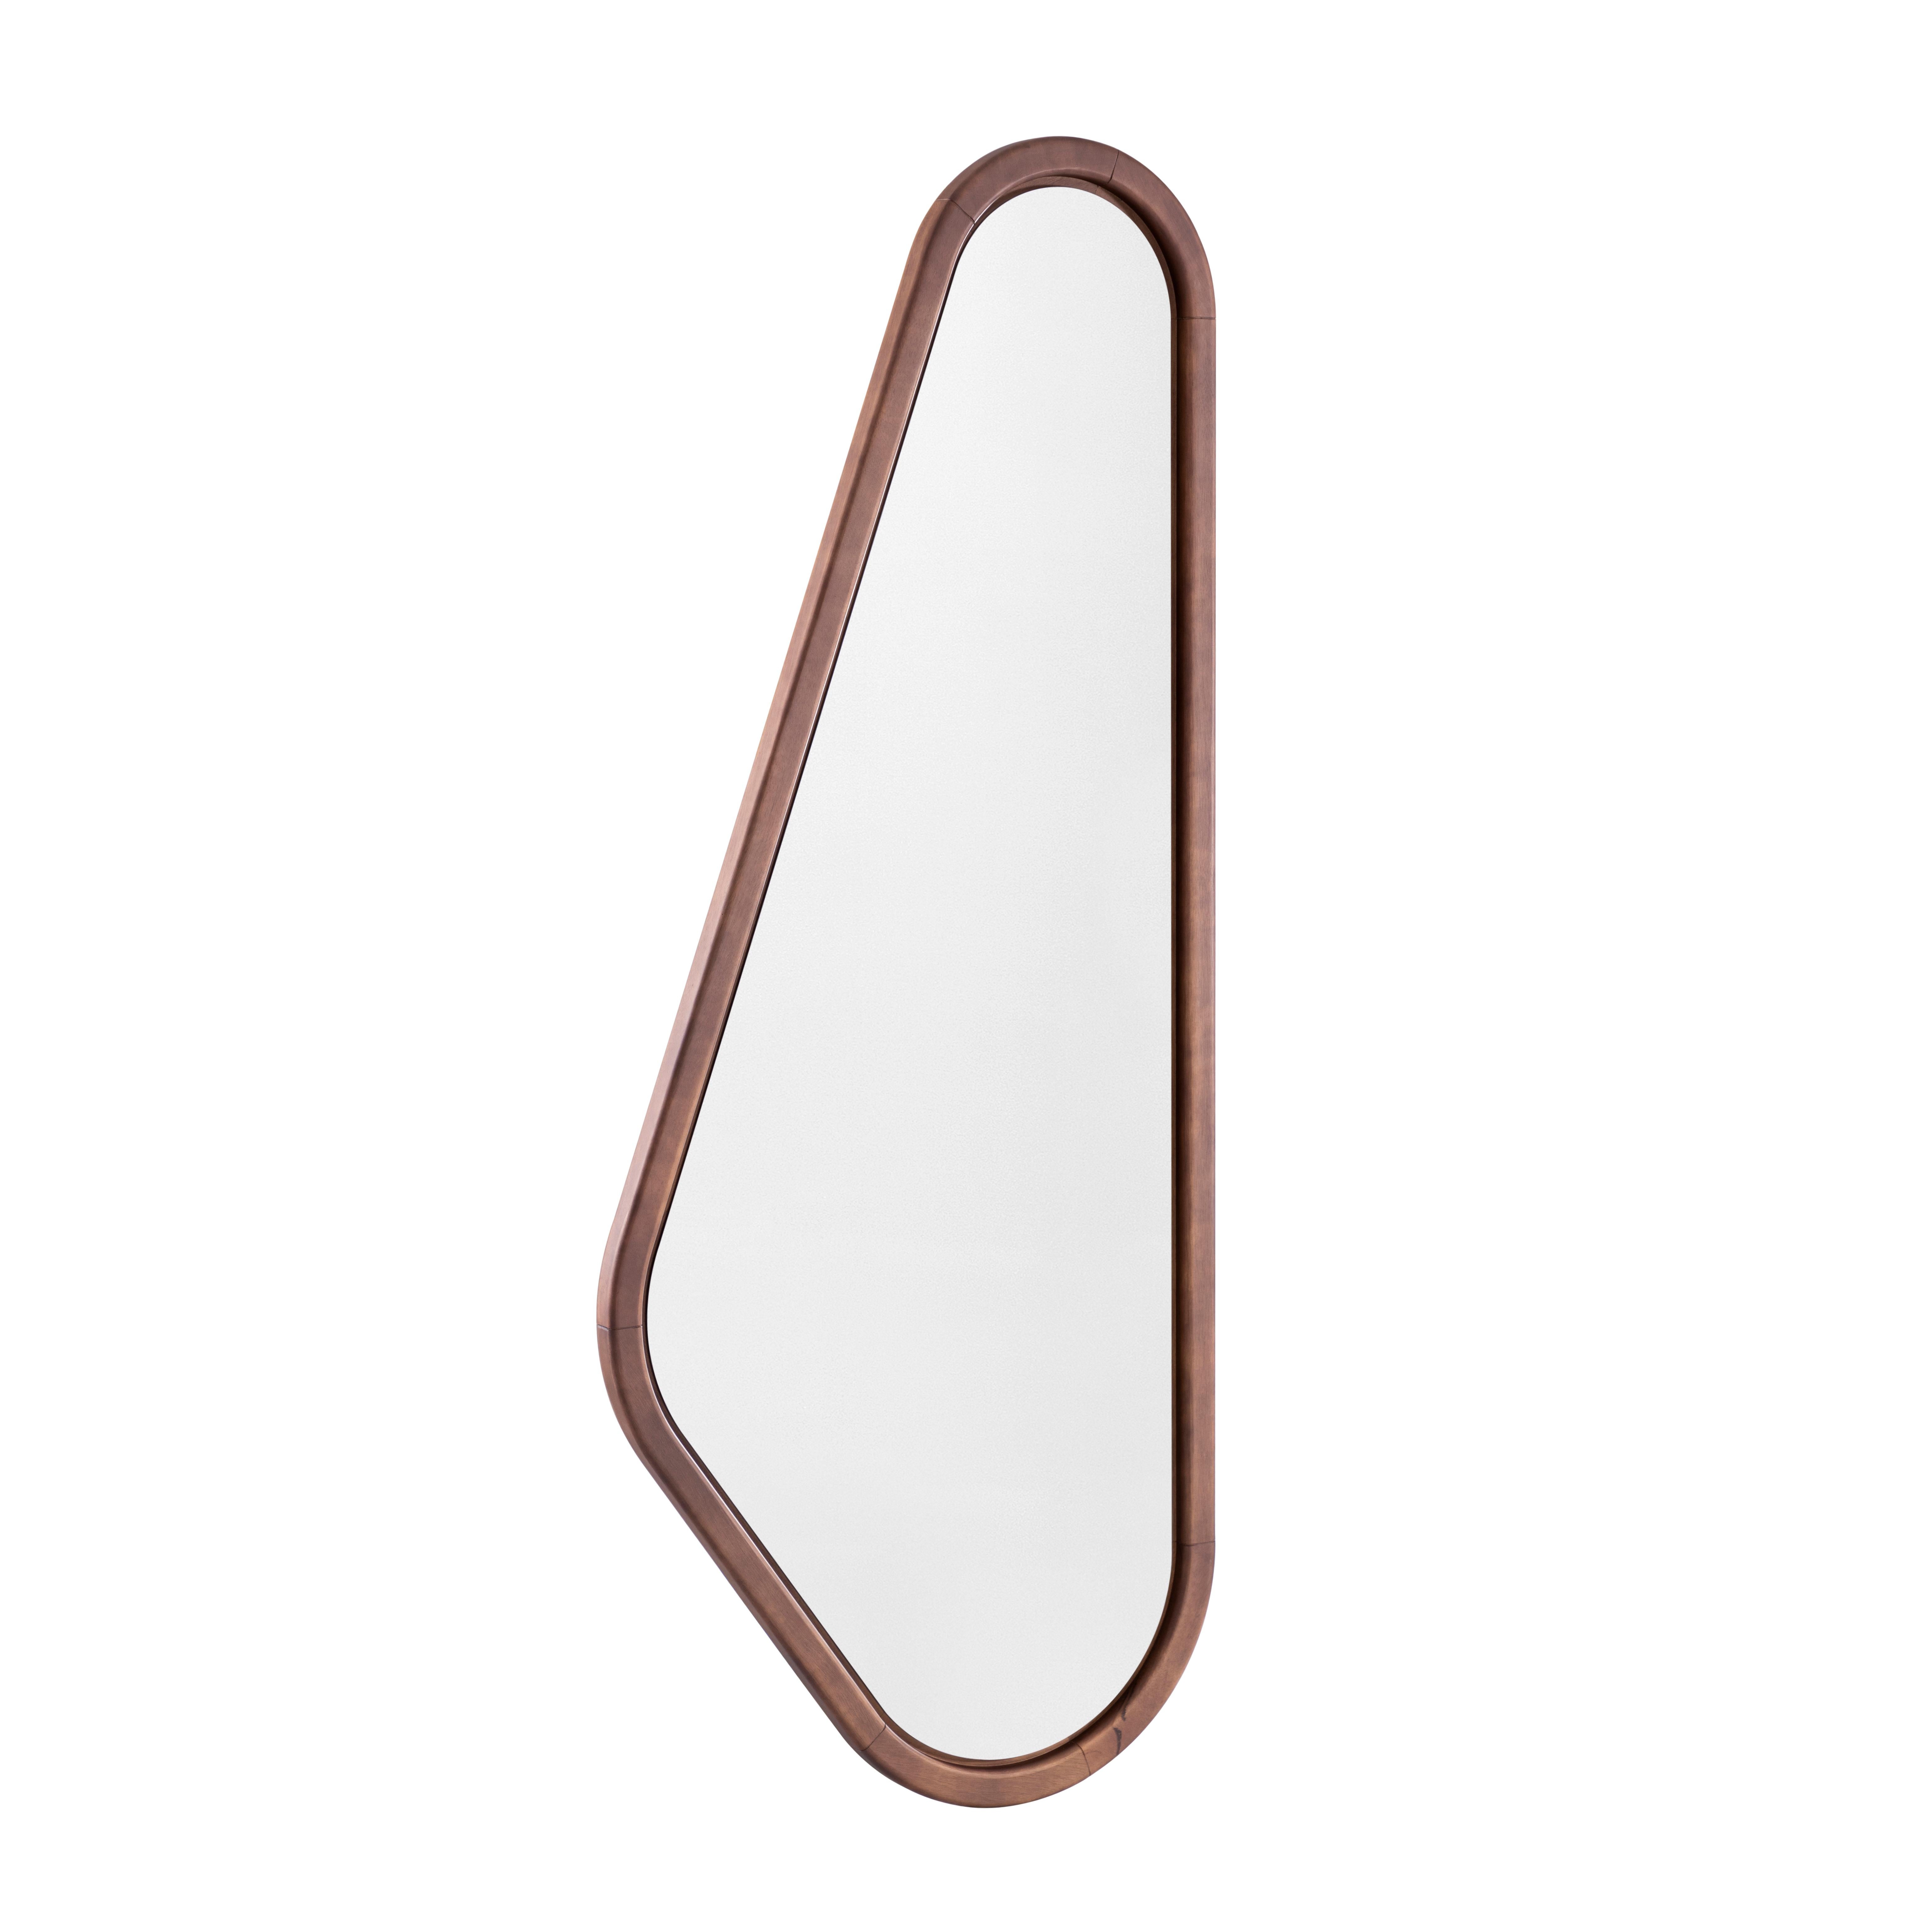 Contemporary Ali Mirror with Solid Wood Walnut Frame Set For Sale